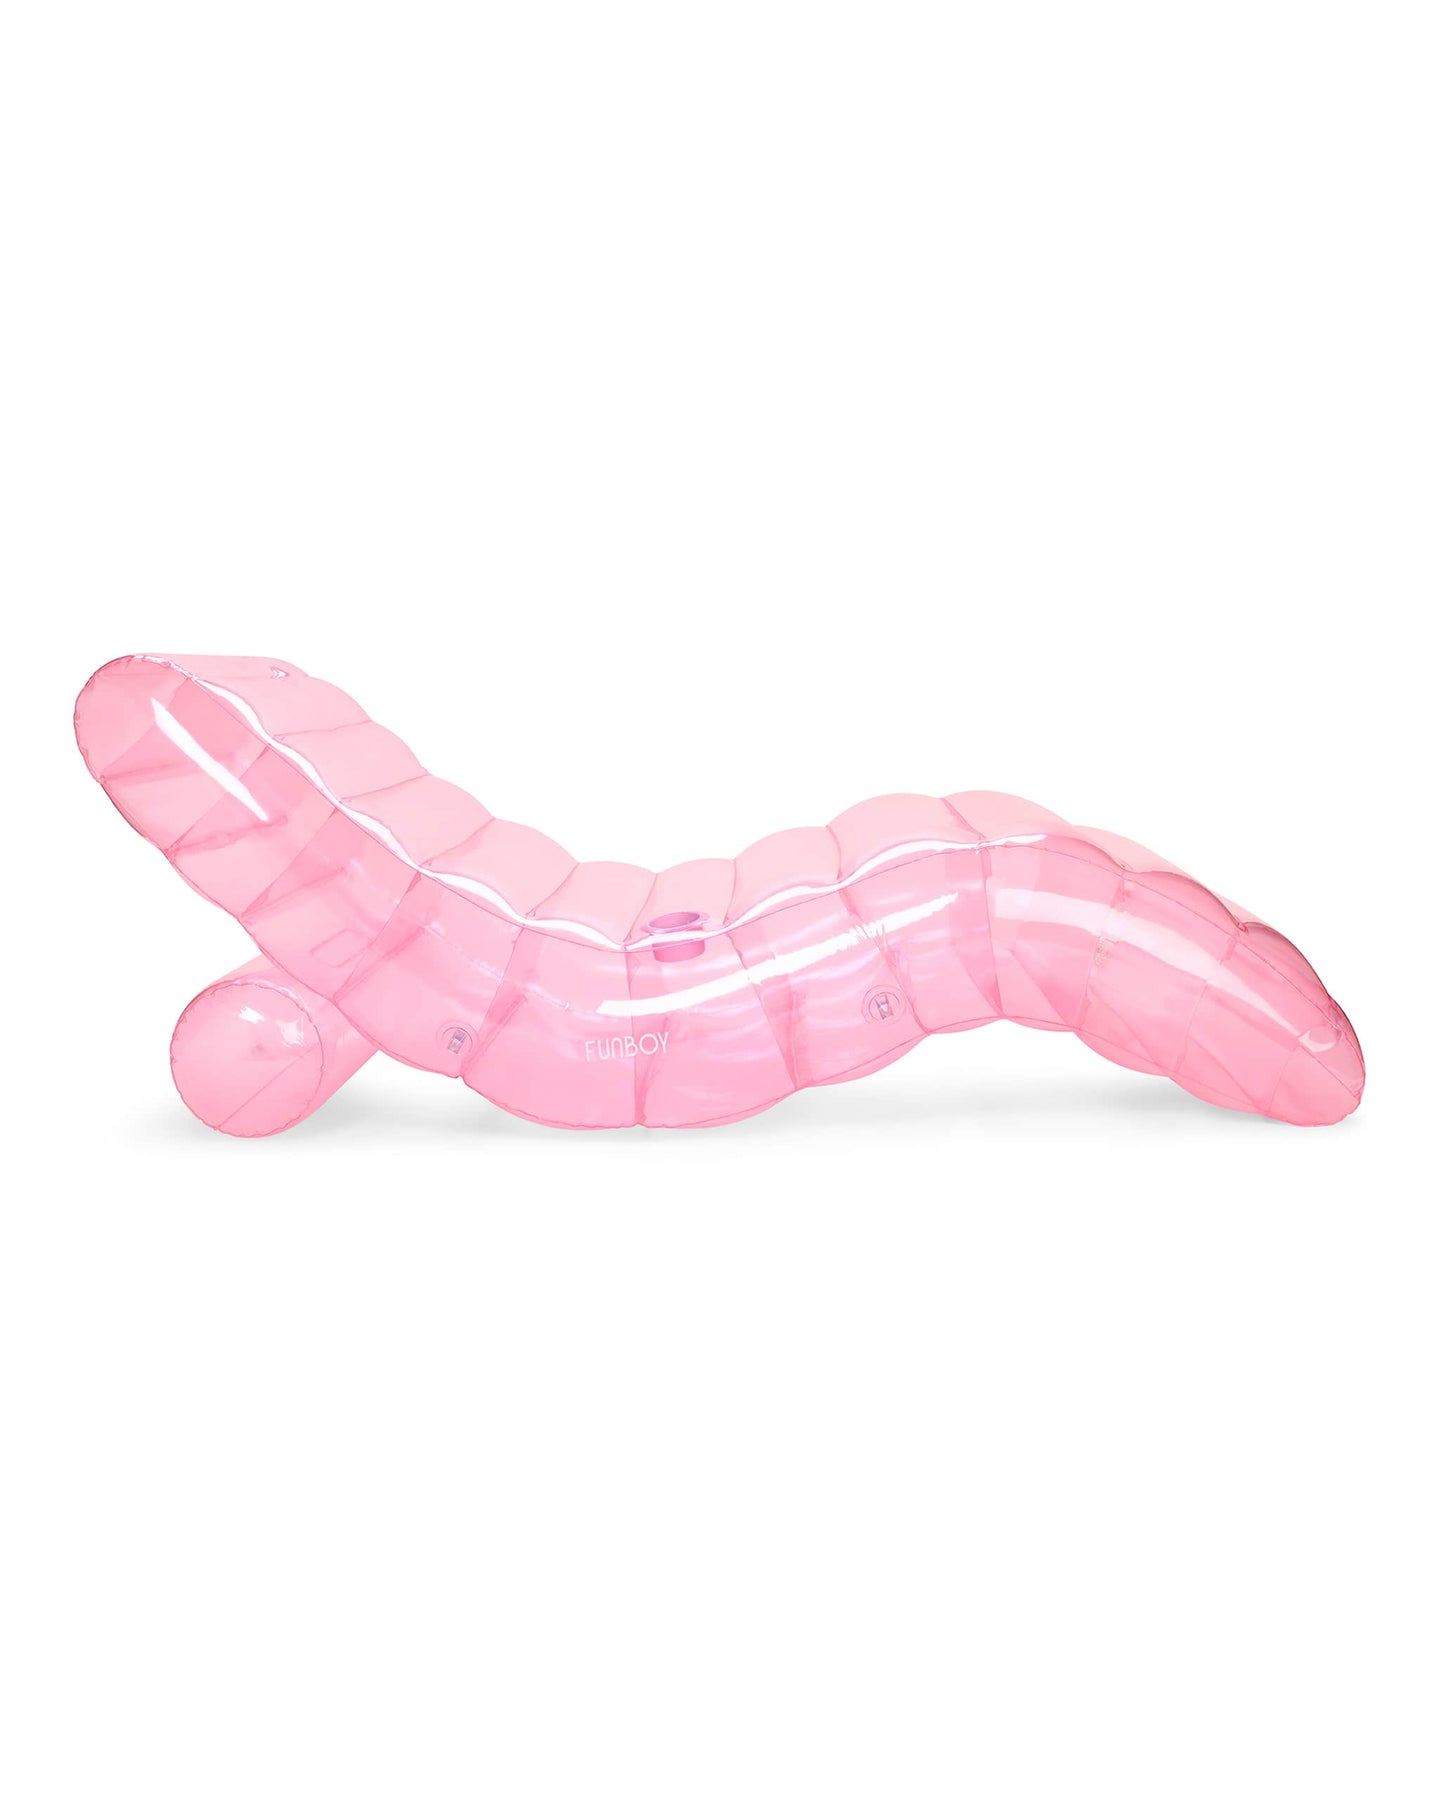 Clear Pink Chaise Lounger Pool Float